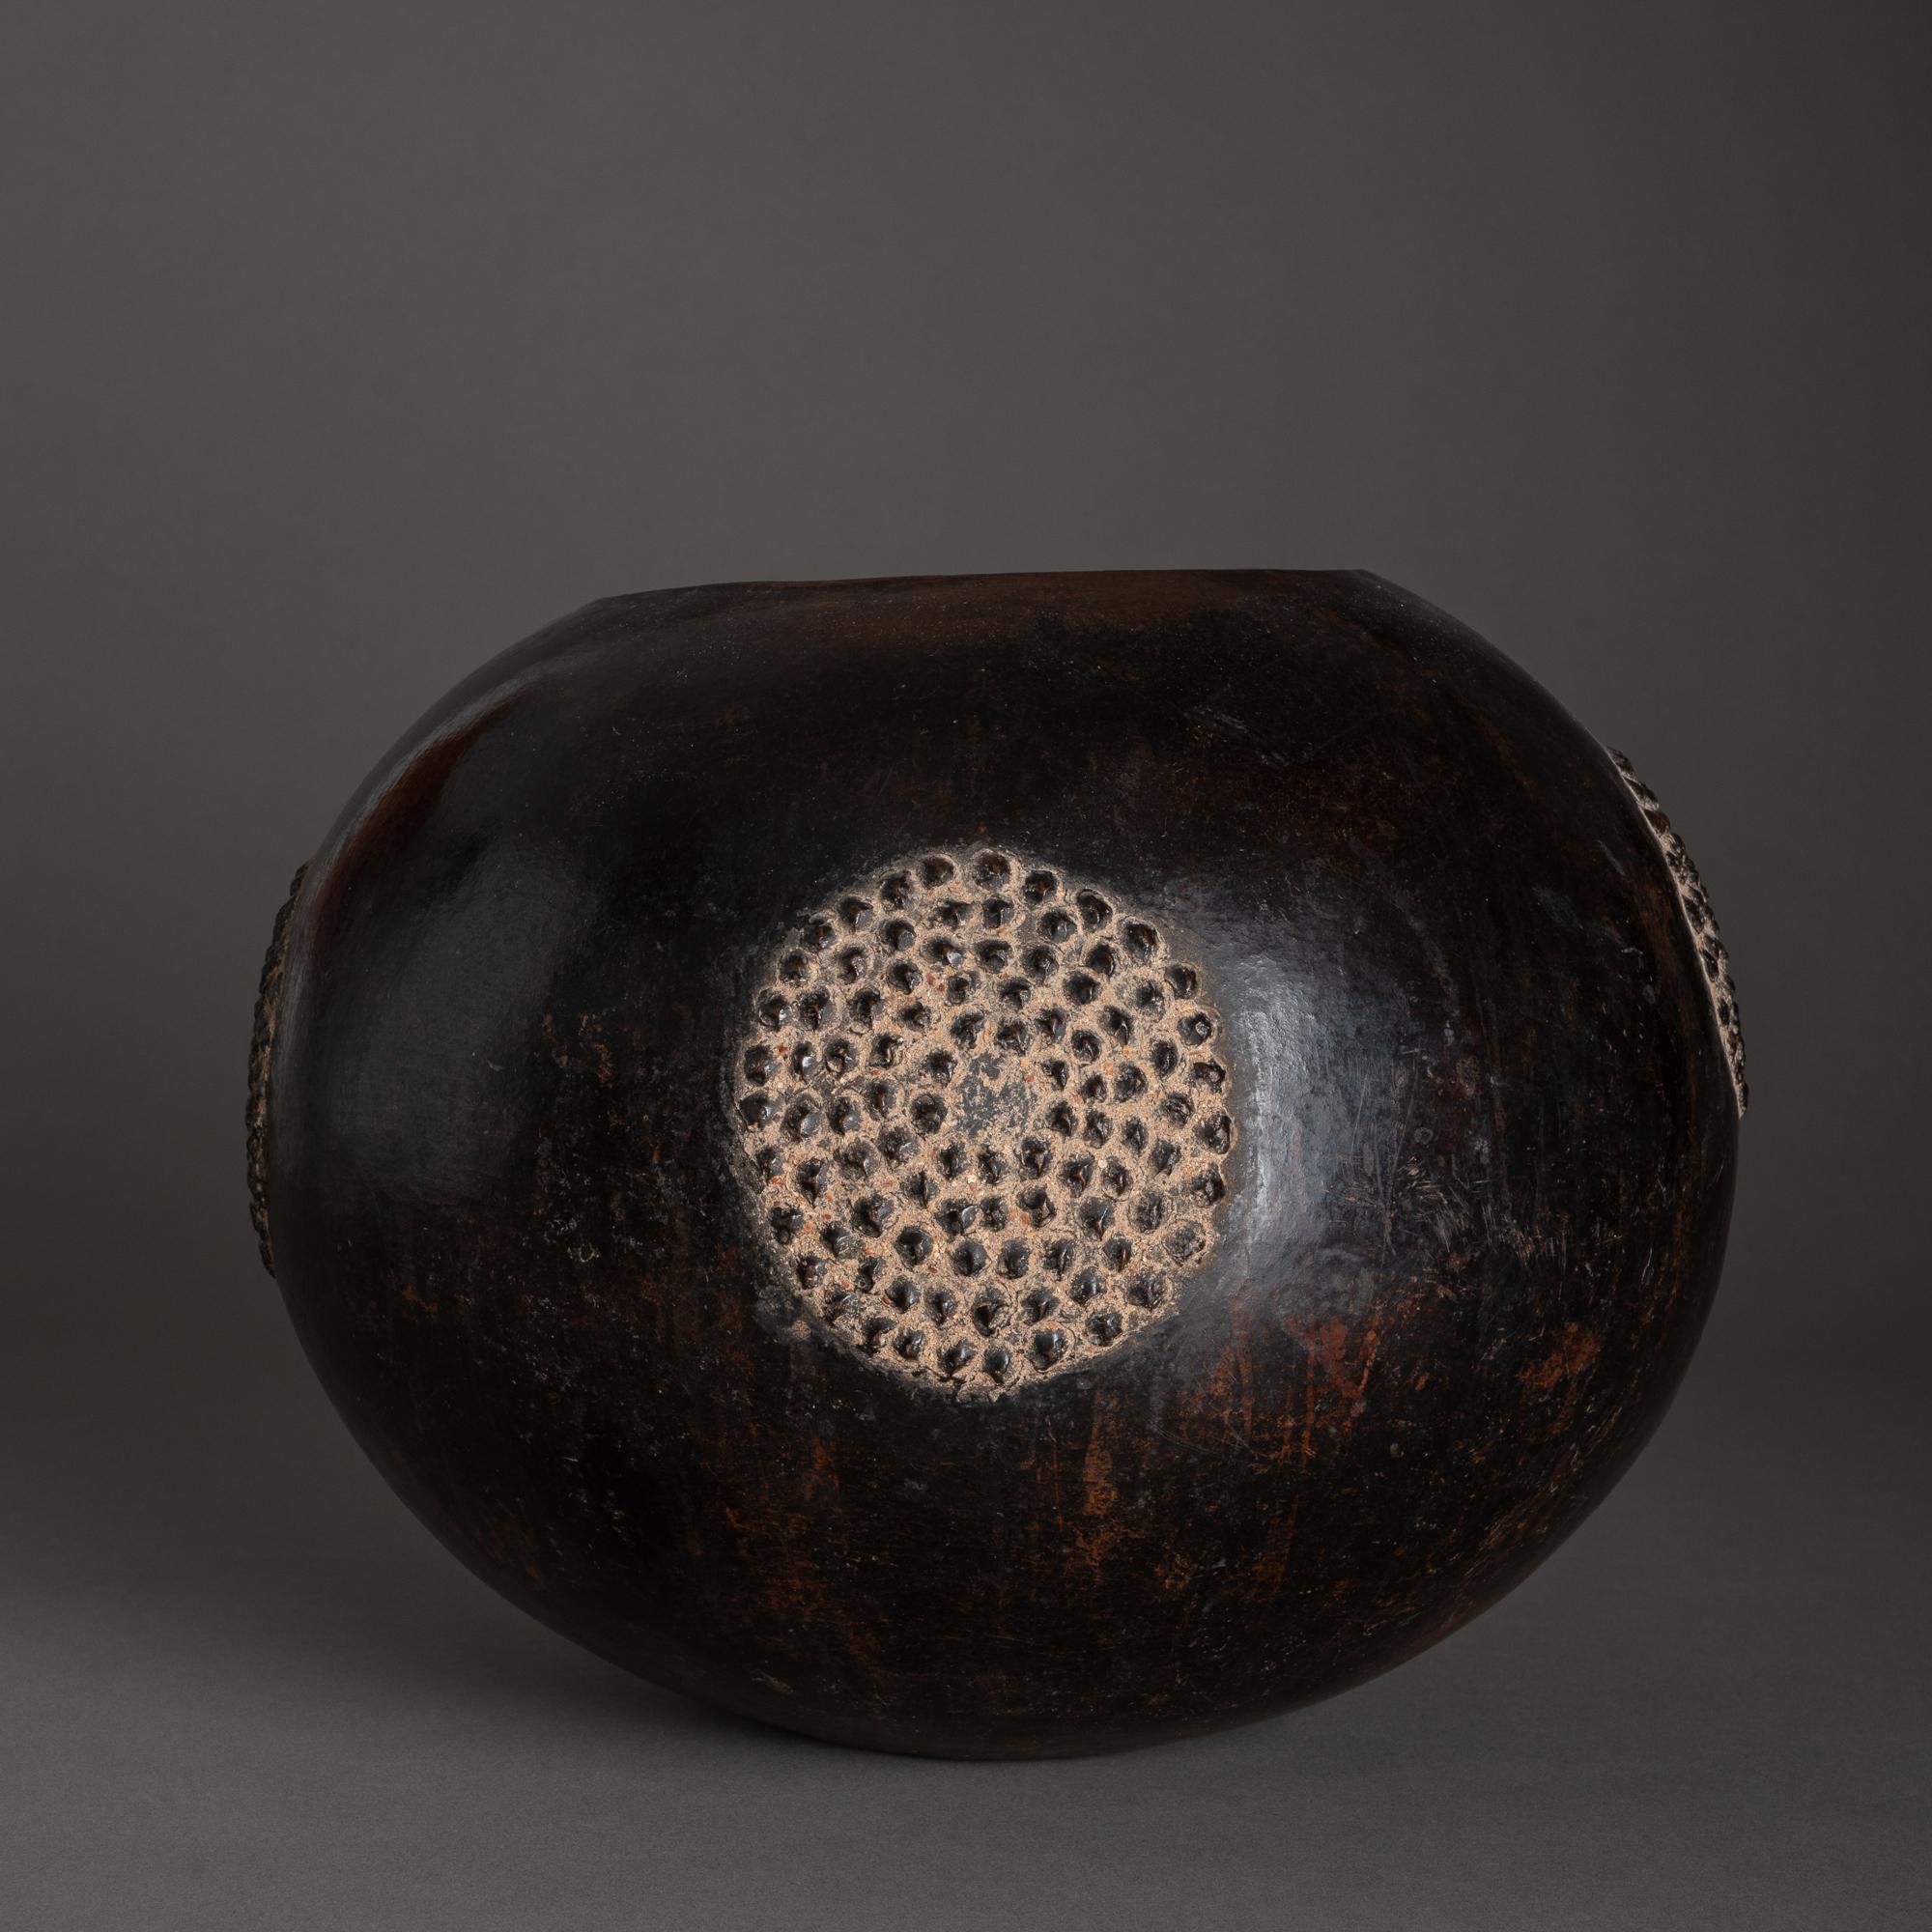 Zulu beer pots, or Ukhamba, are shaped with the coil method, then smoothed, incised, indented or embossed with geometric patterns, and finally fired, which hardens the clay and darkens its surface. The black, glossy finish of this Ukhamba,